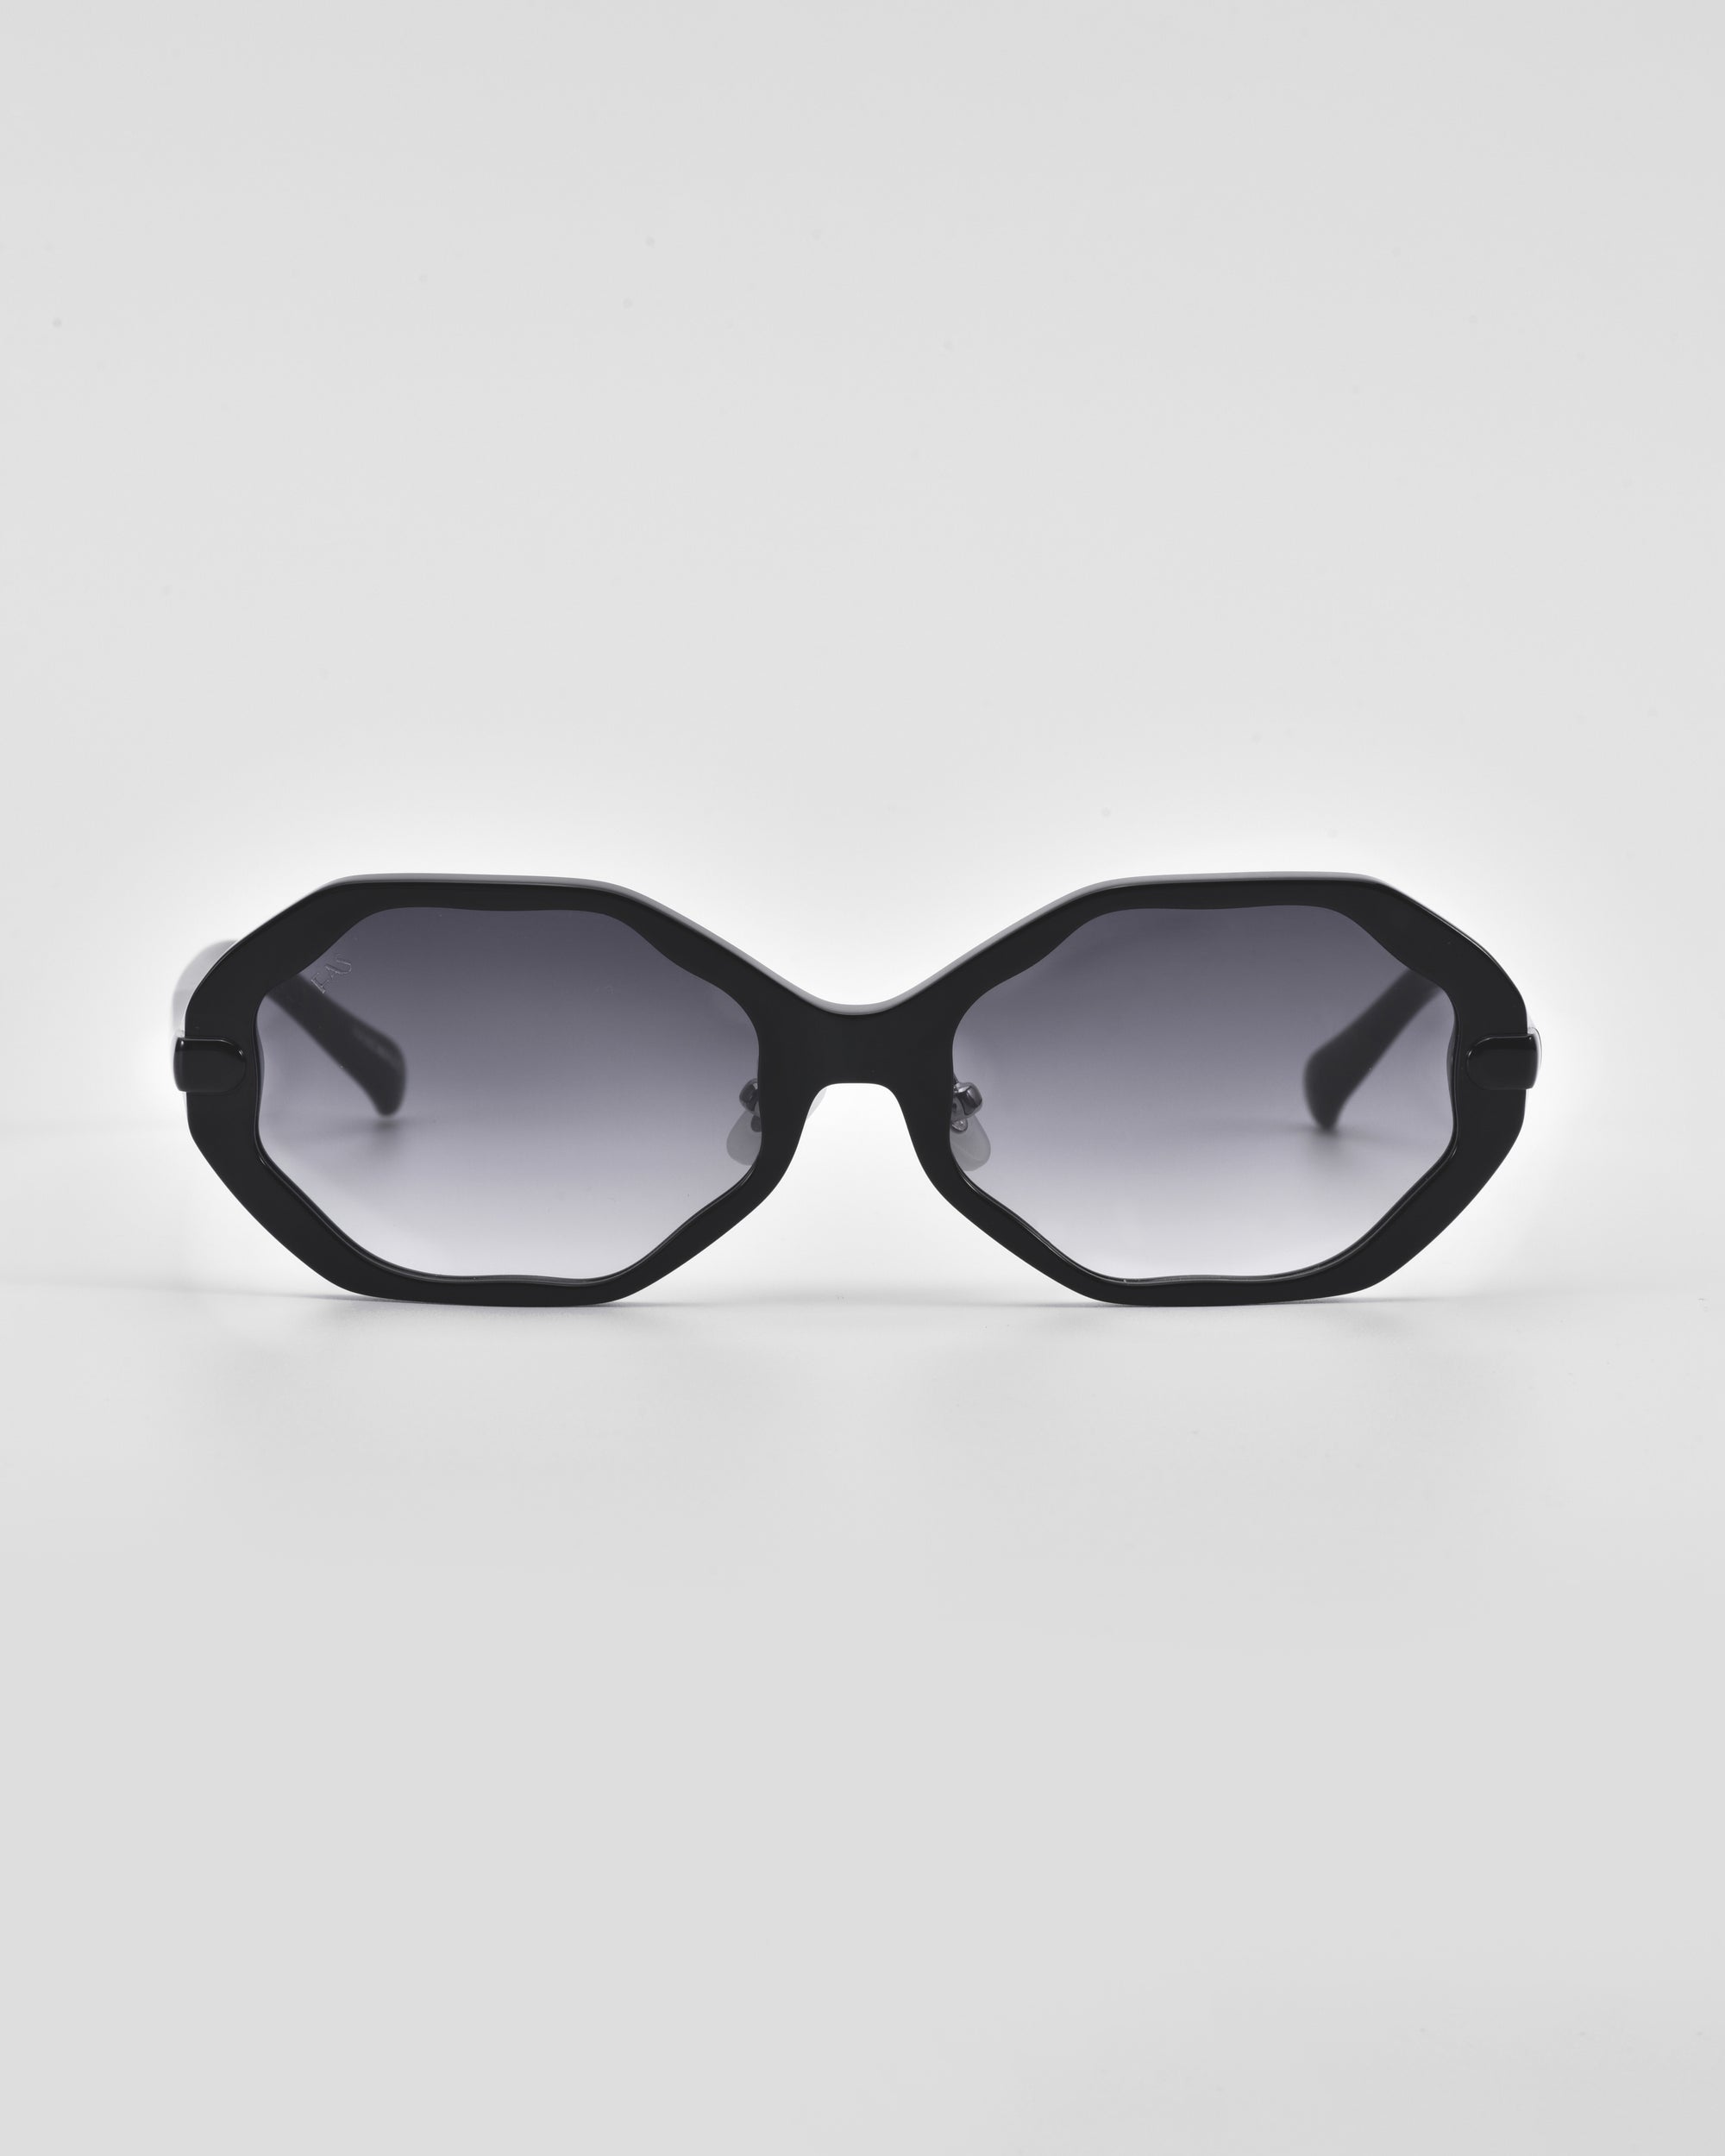 A pair of black octagonal Lotus sunglasses by For Art's Sake® with gray-tinted lenses set against a white background. The design is minimalist, featuring thin temples and no visible branding or adornments. Jade-stone nose pads and the clean, angular silhouette give these sunglasses a modern and stylish appearance.